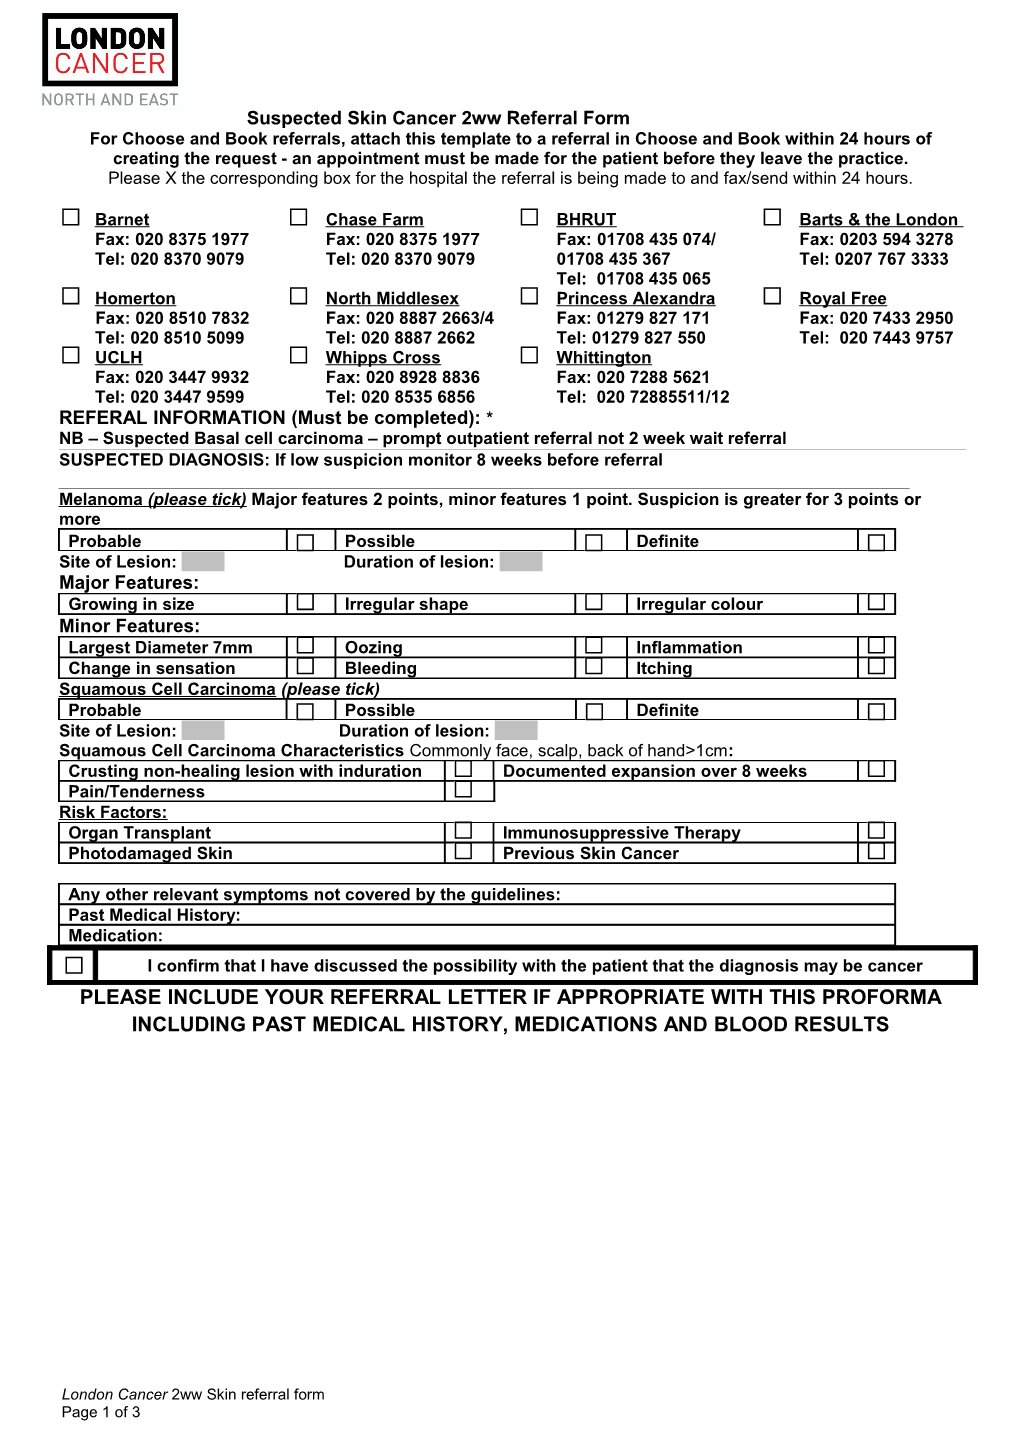 London Cancer 2Ww Skin Referral Form Page 1 of 3